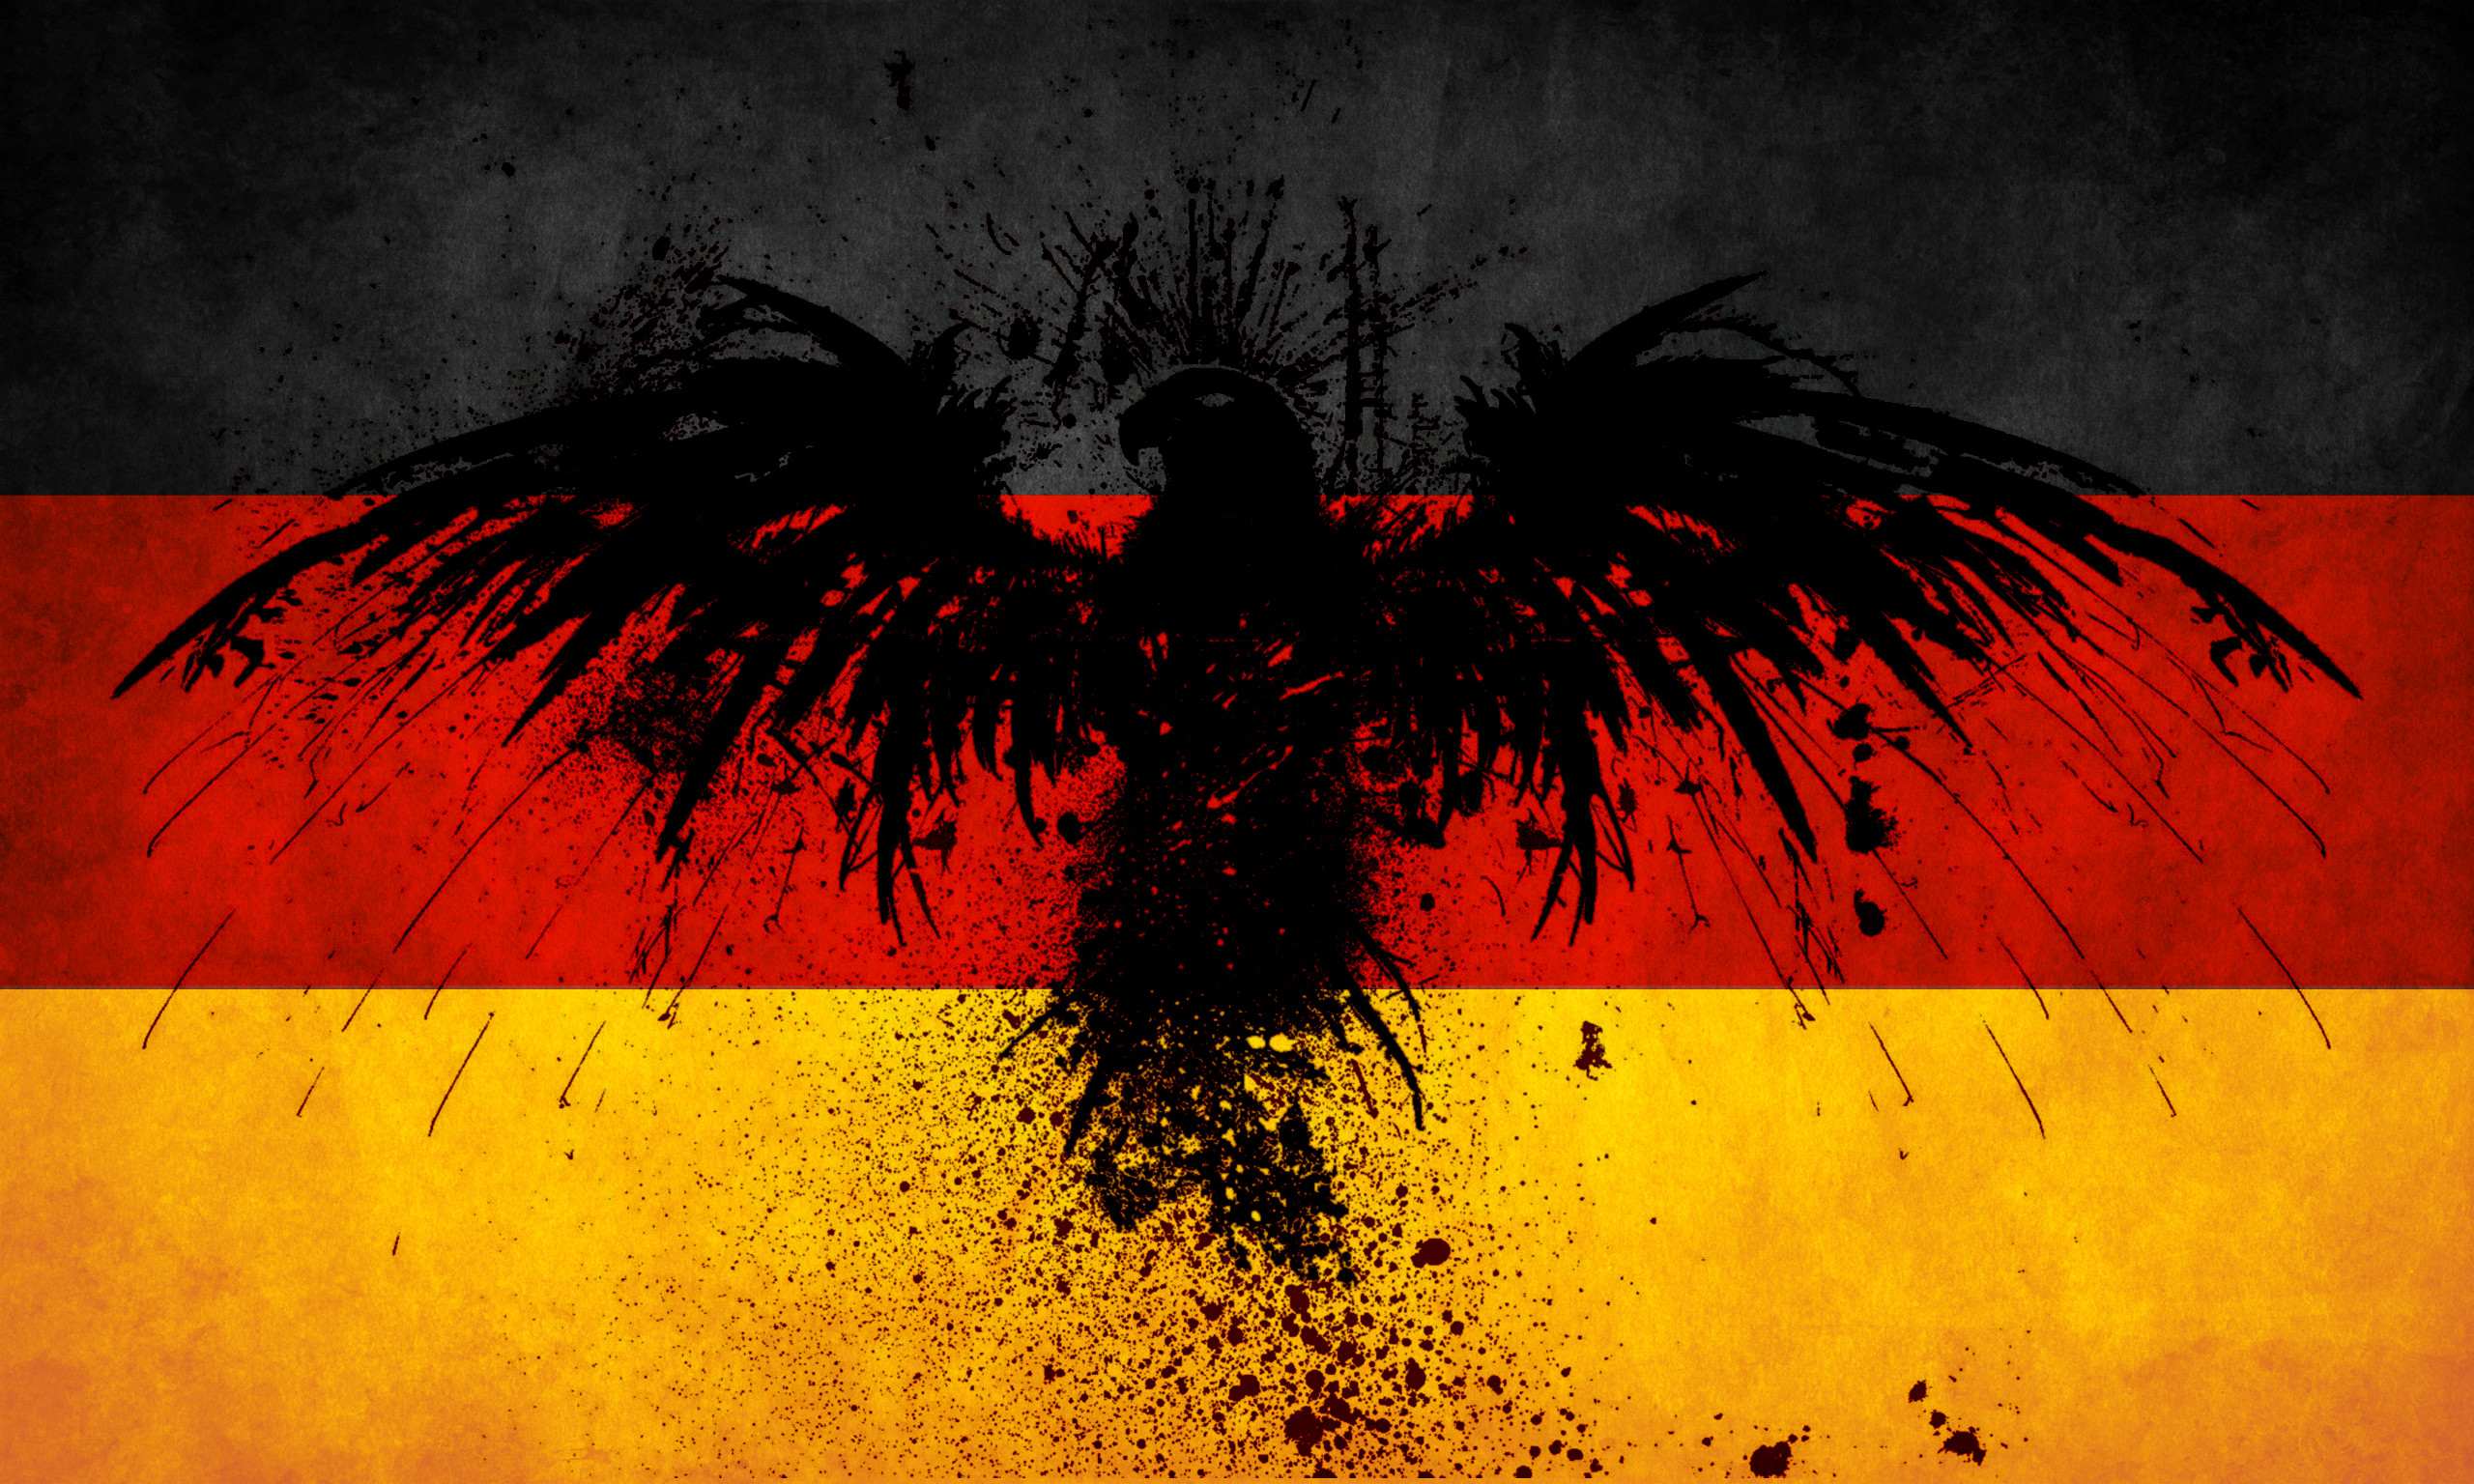 Germany Flag Wallpapers Wallpaper Cave 11 Flag Of Germany Hd Wallpapers Backgrounds Wallpaper Abyss 2560x1536